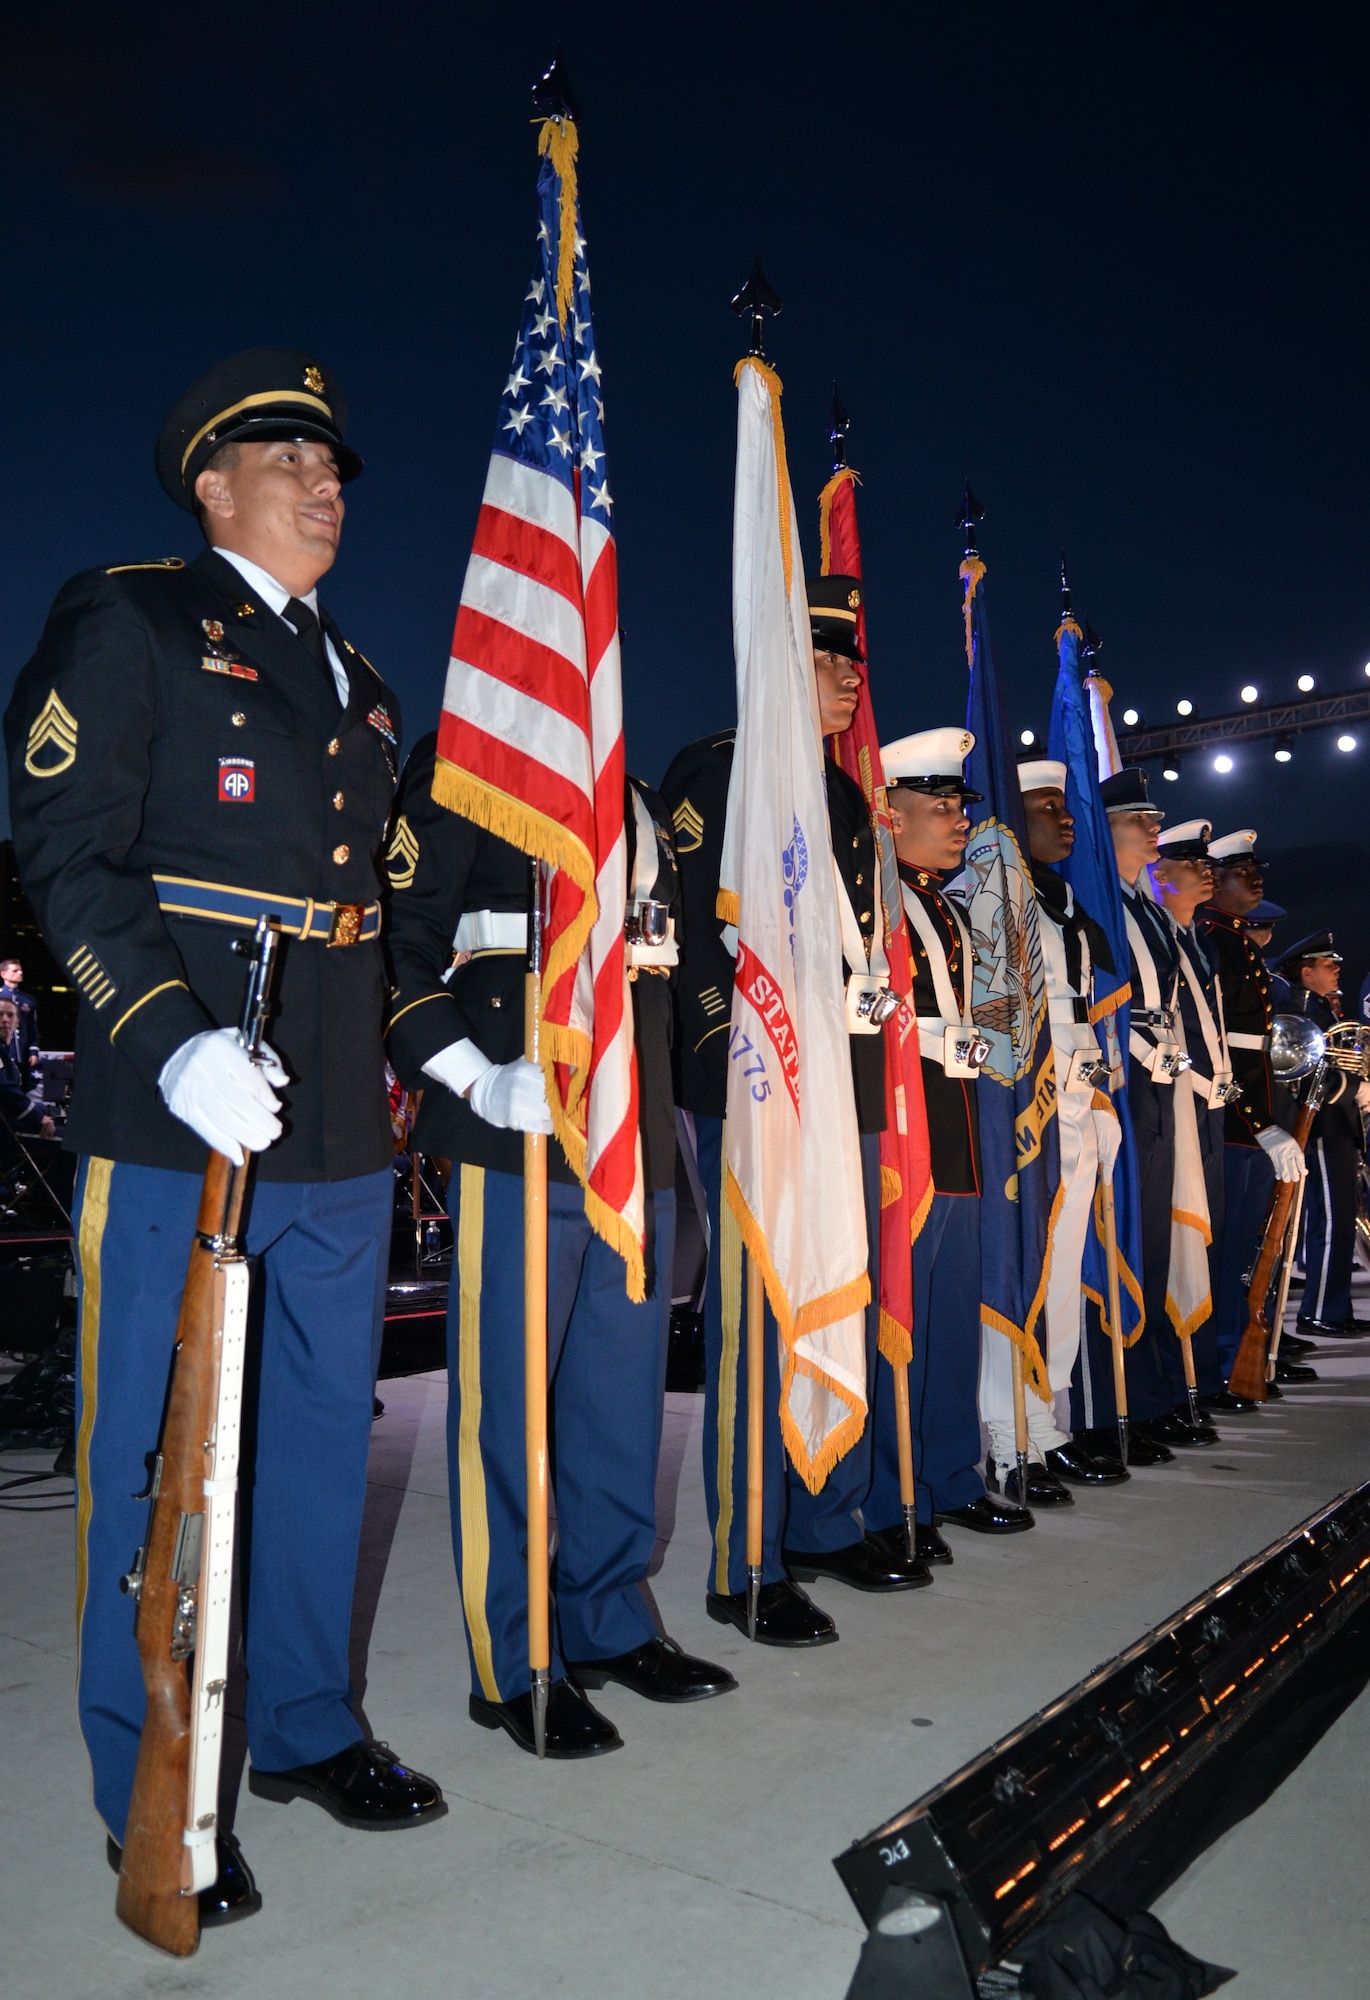 A Joint Force Color Guard team represented each military service at Macy’s Fourth of July fireworks show. The Air Force Band and Honor Guard performed at Hunter’s Point South Park on July 4, 2015. This performance was part of a larger five-day tour in New York City to represent the Air Force on the nation's birthday (U.S. Air Force photo/1Lt. Esther Willett).